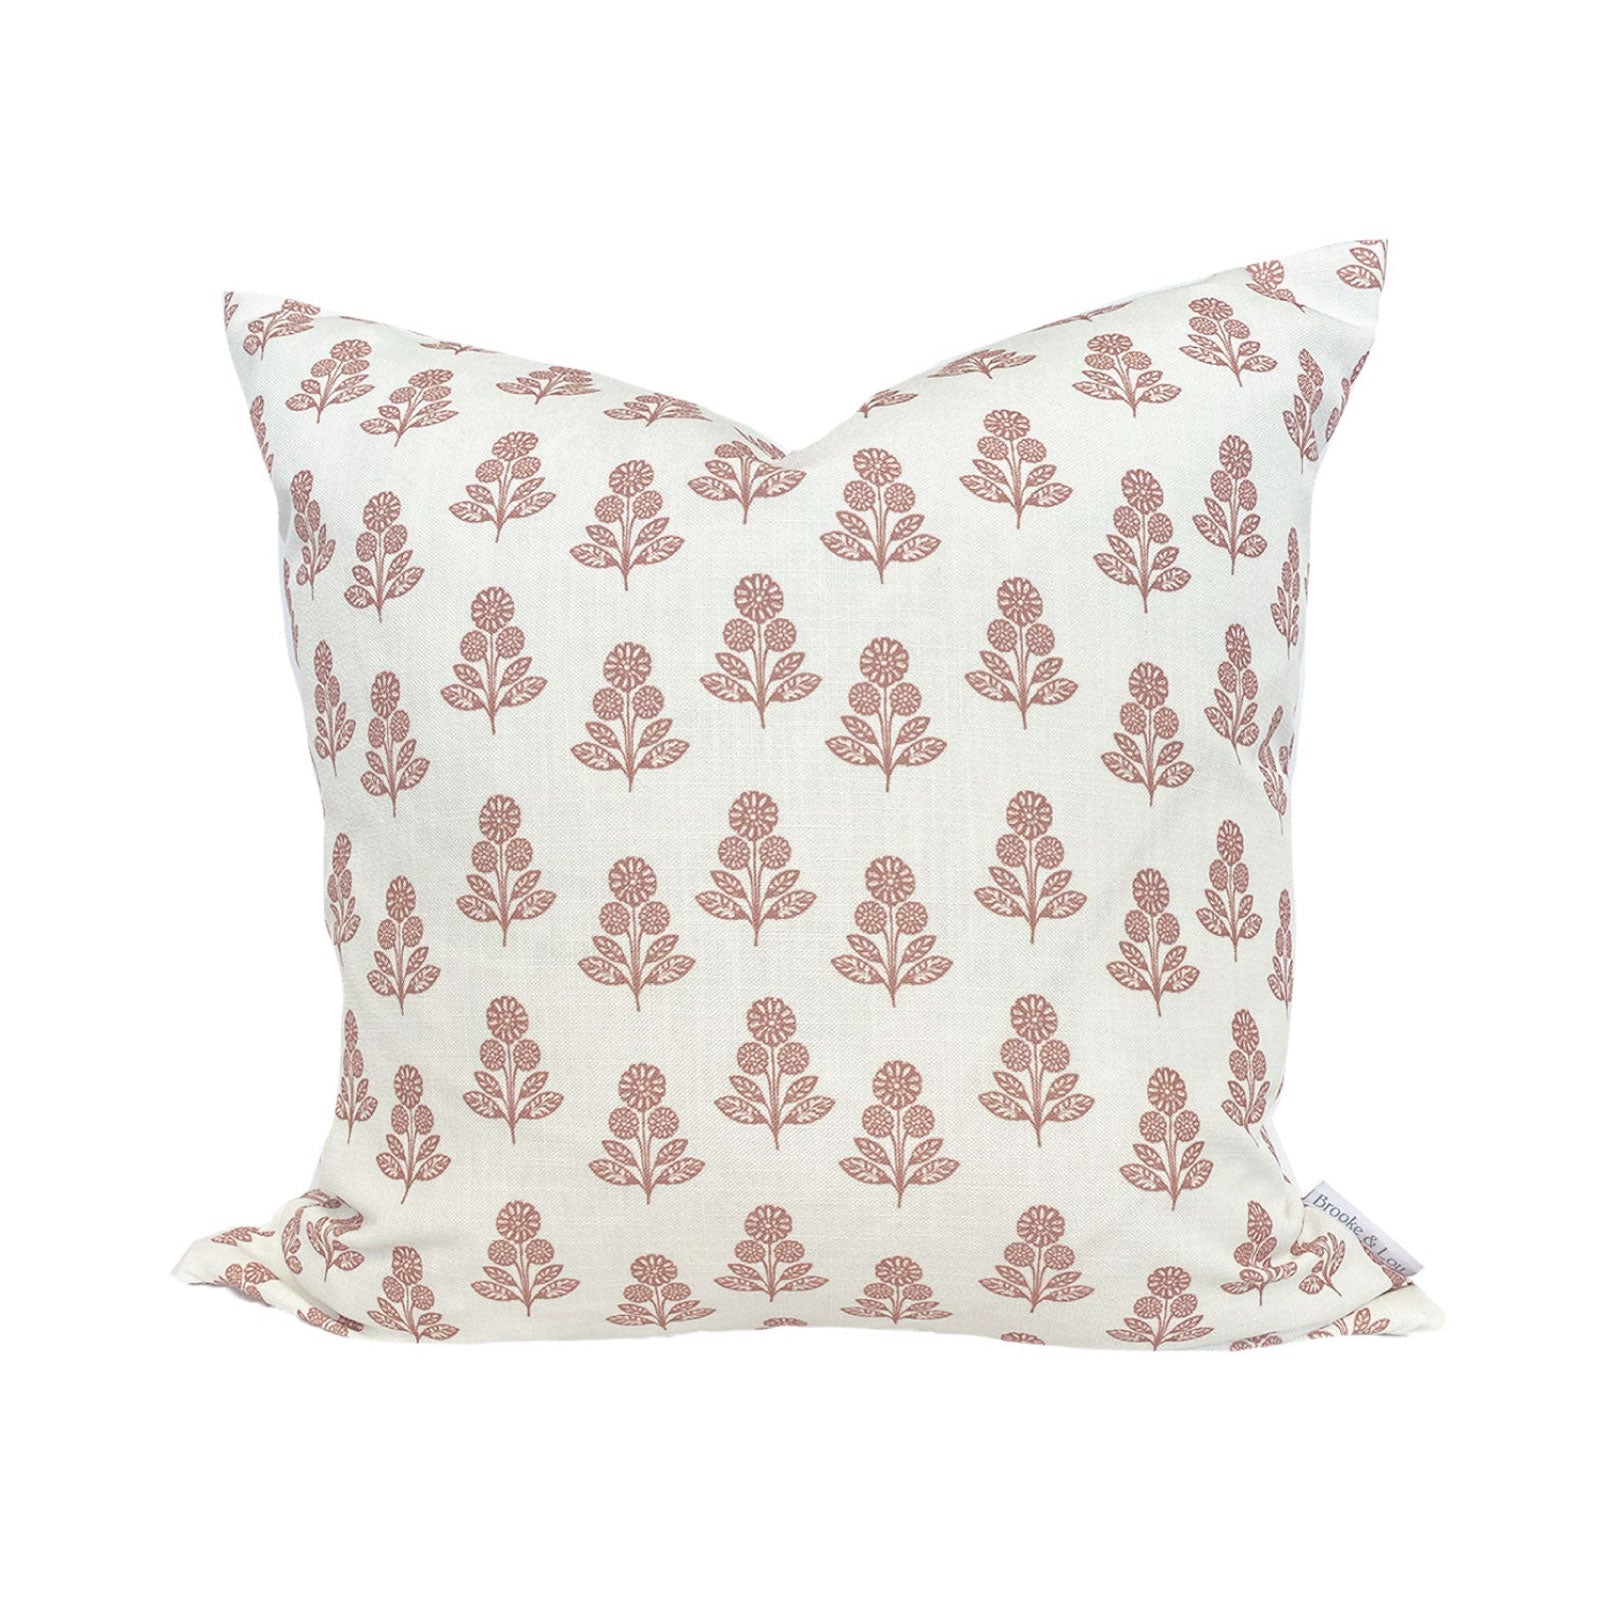 Stella Floral Pillow in Rose